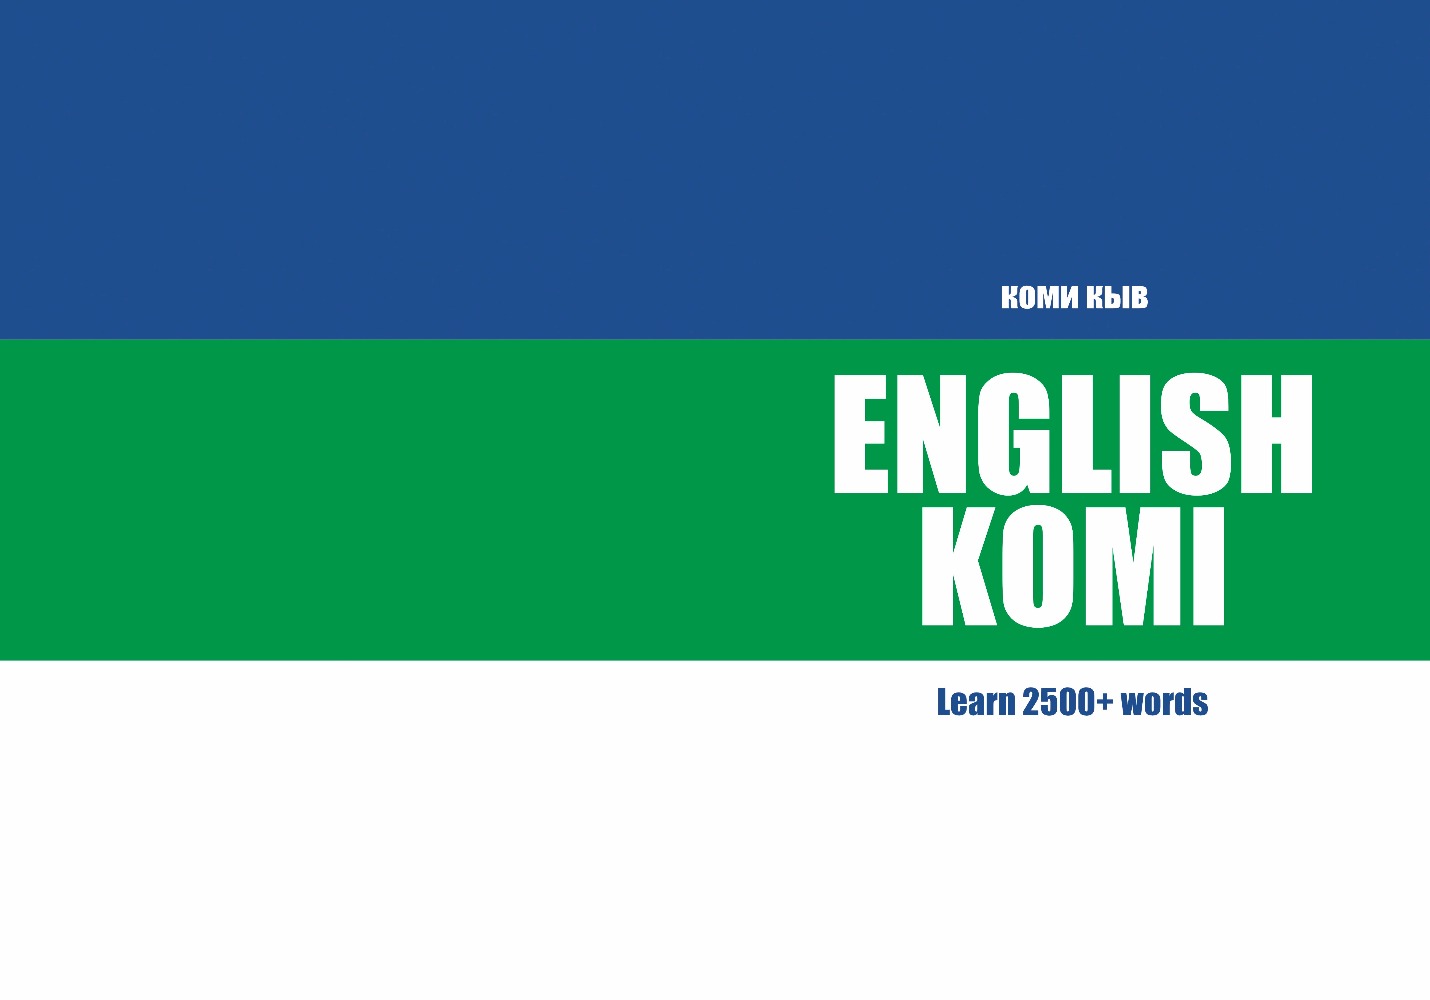 Komi language learning notebook cover